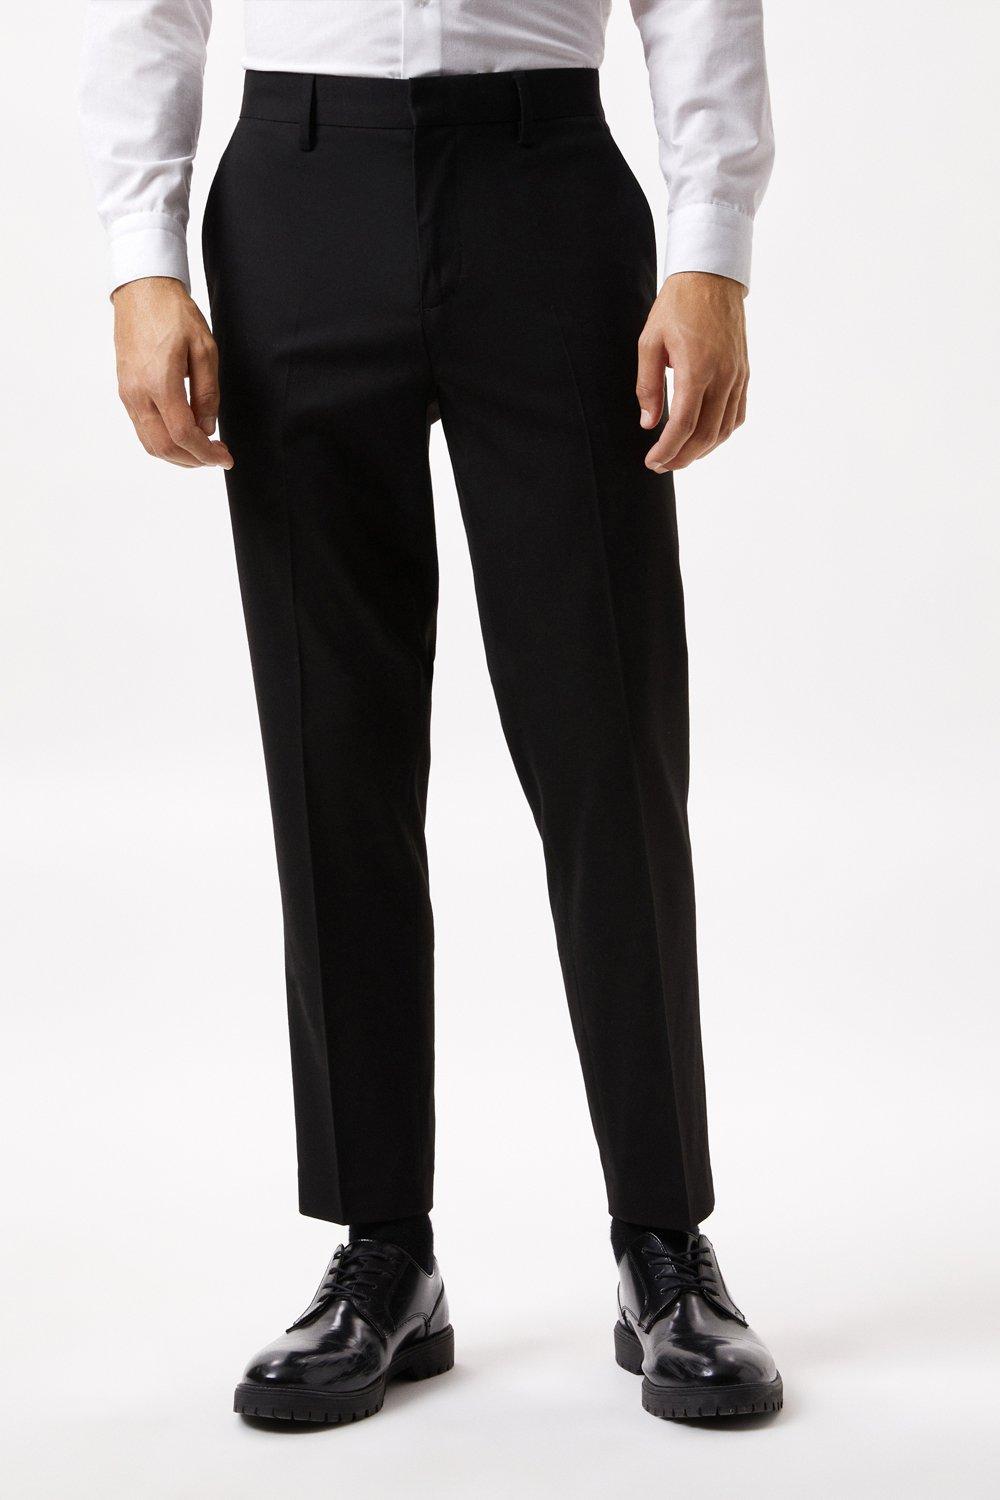 Trousers | Tapered Fit Black Smart Trousers | Burton